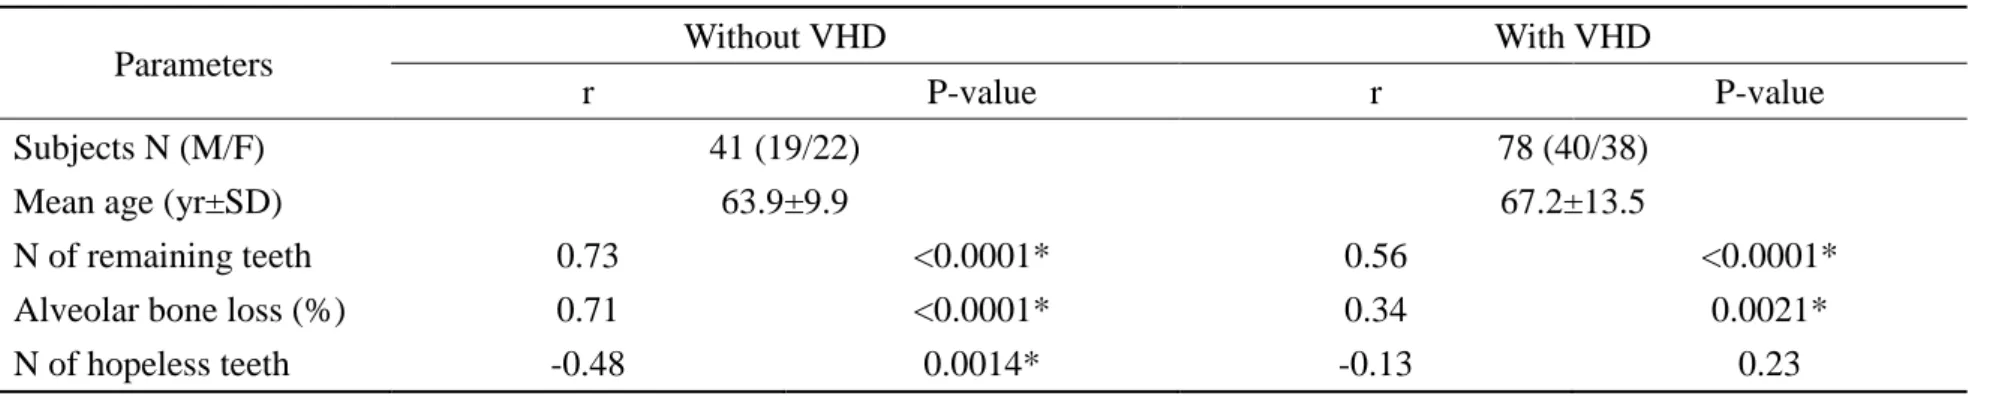 Table 1. Correlation between Pg IgG titer and oral conditions in patients with or without VHD 